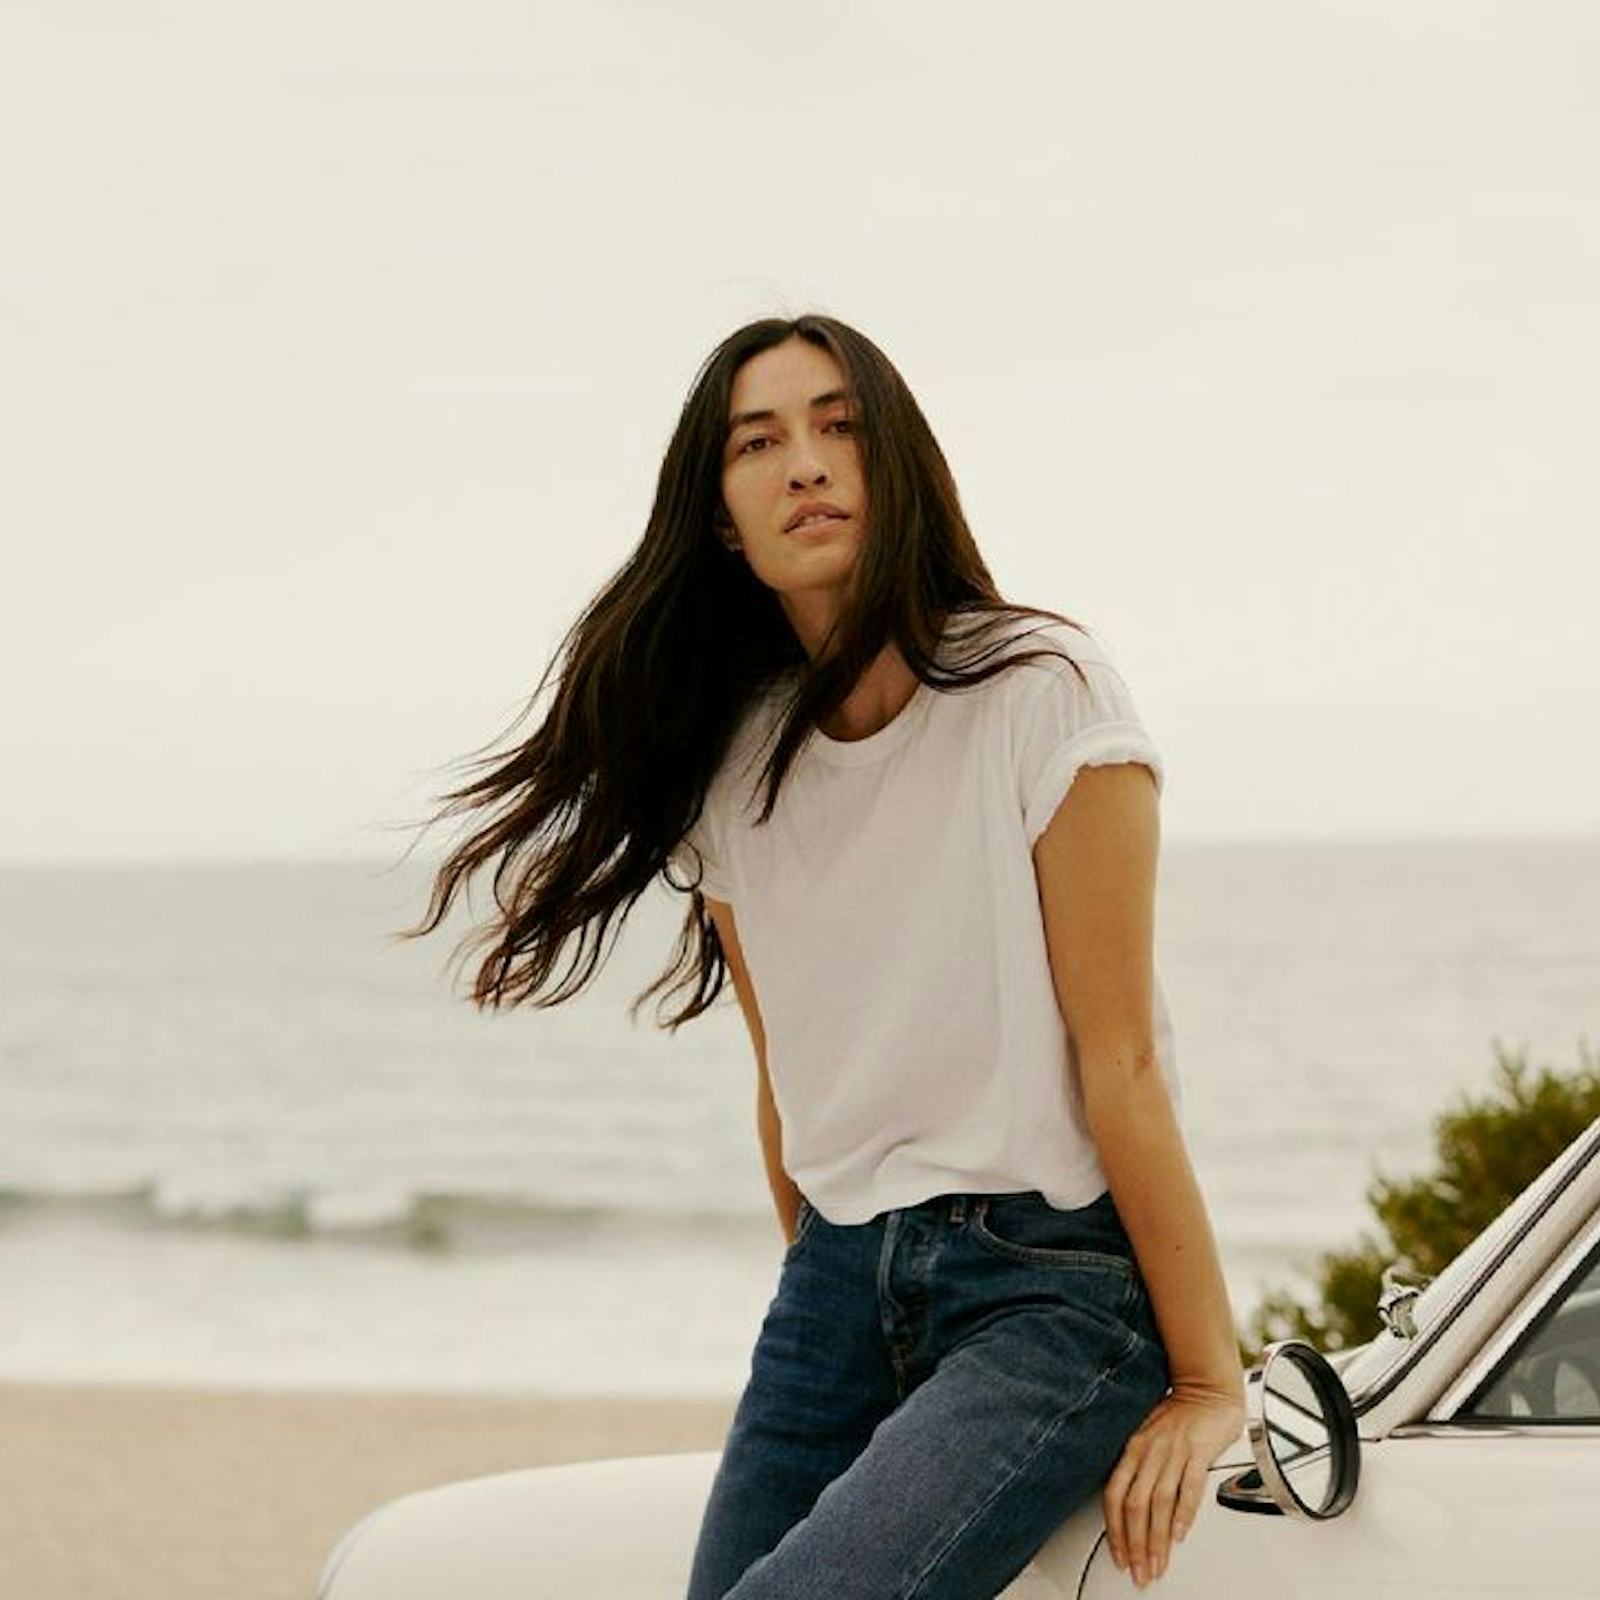 The Classic White T-shirt Every Stylish Woman Should Own